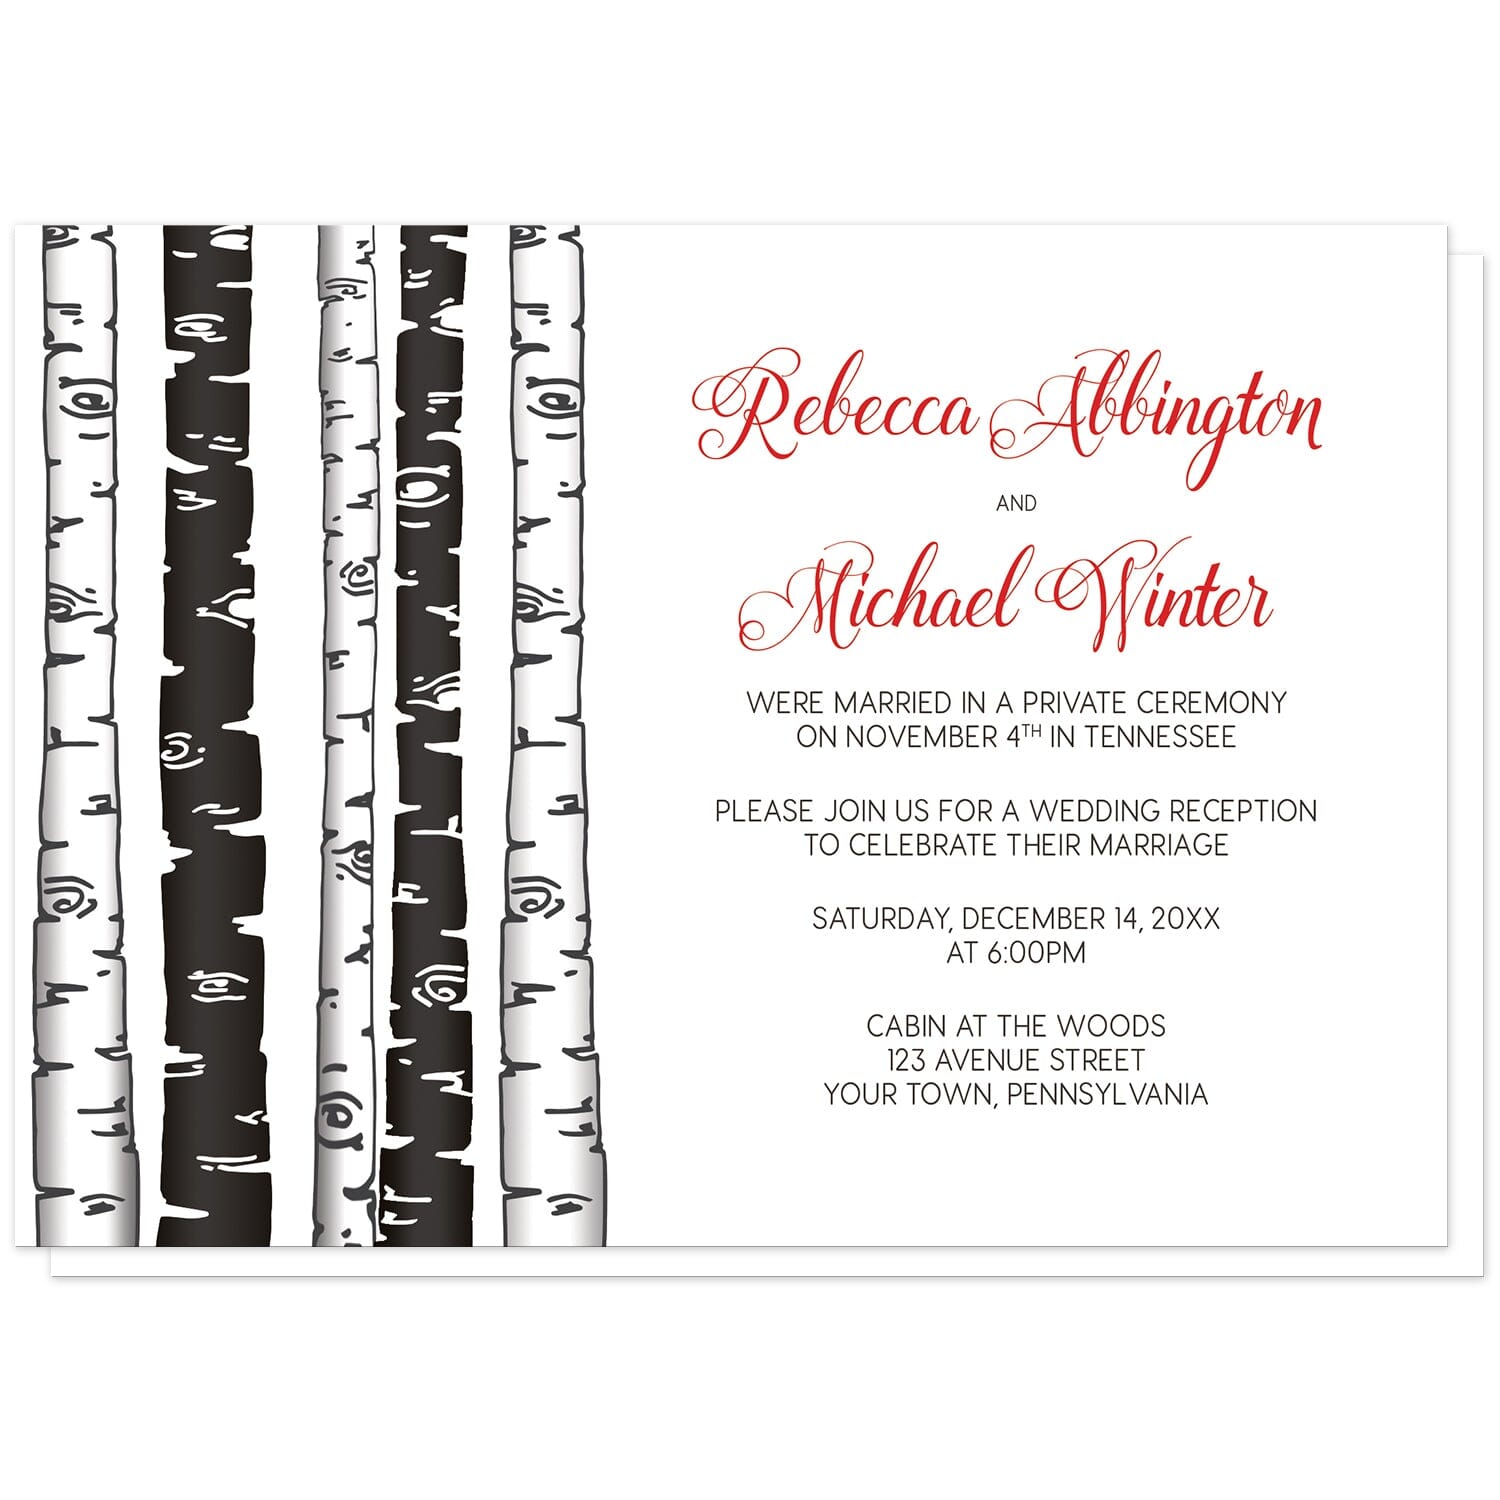 Monochrome Birch Tree with Red Reception Only Invitations at Artistically Invited. Monochrome birch tree with red reception only invitations with an alternating monochrome black and white birch trees illustration along the left side. Your personalized post-wedding reception details are custom printed beside the trees in black with the couple's names printed in a red script font for a splash of color.